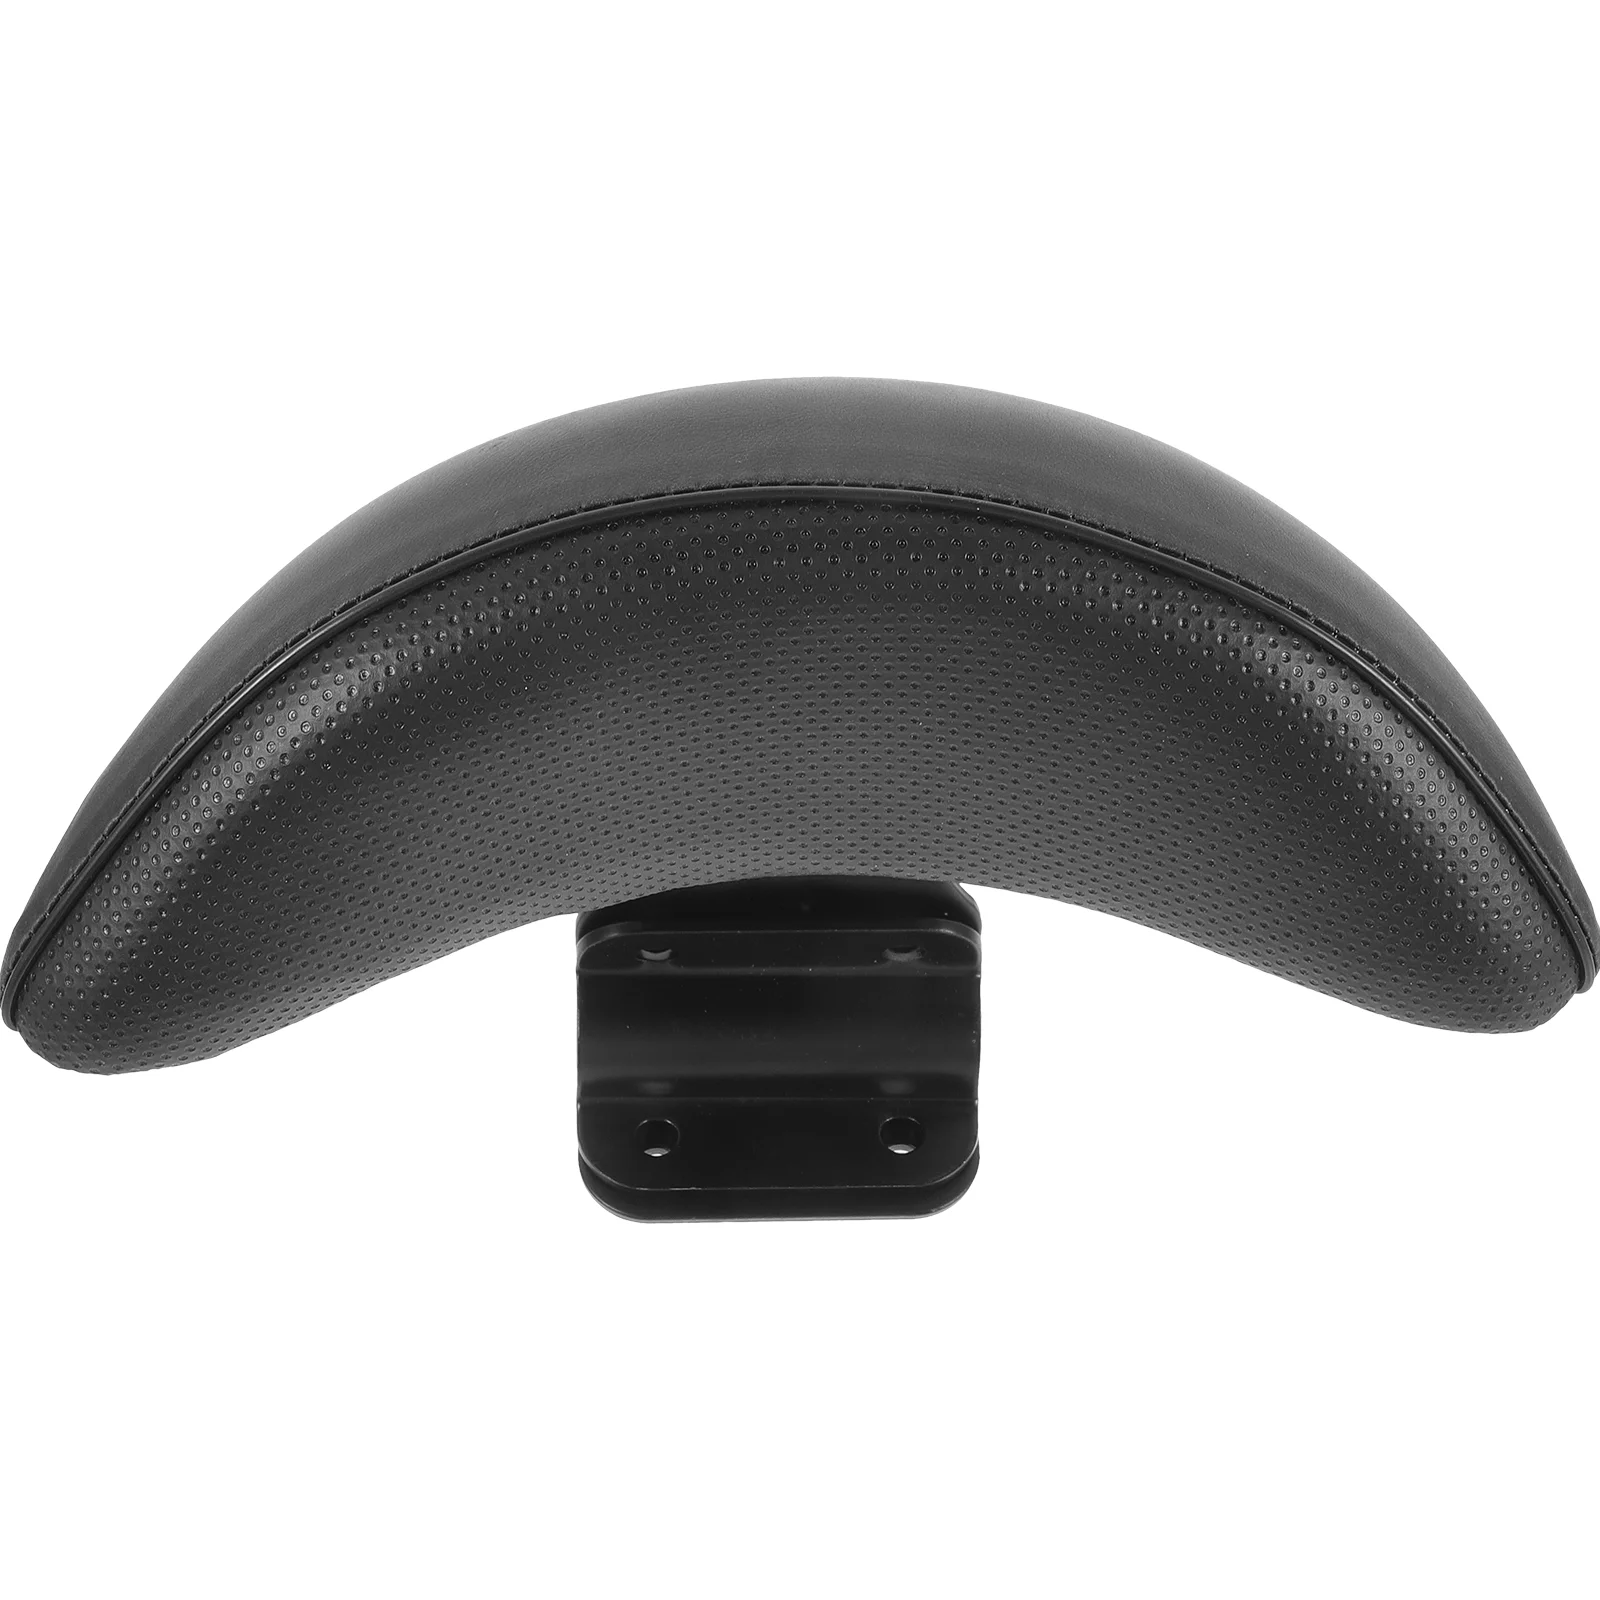 Safety Rear Rest Back Cushion Bike Cycling Universal Backrest Seat Electric Bicycles Motorcycle Accessories Supplies Motorbike